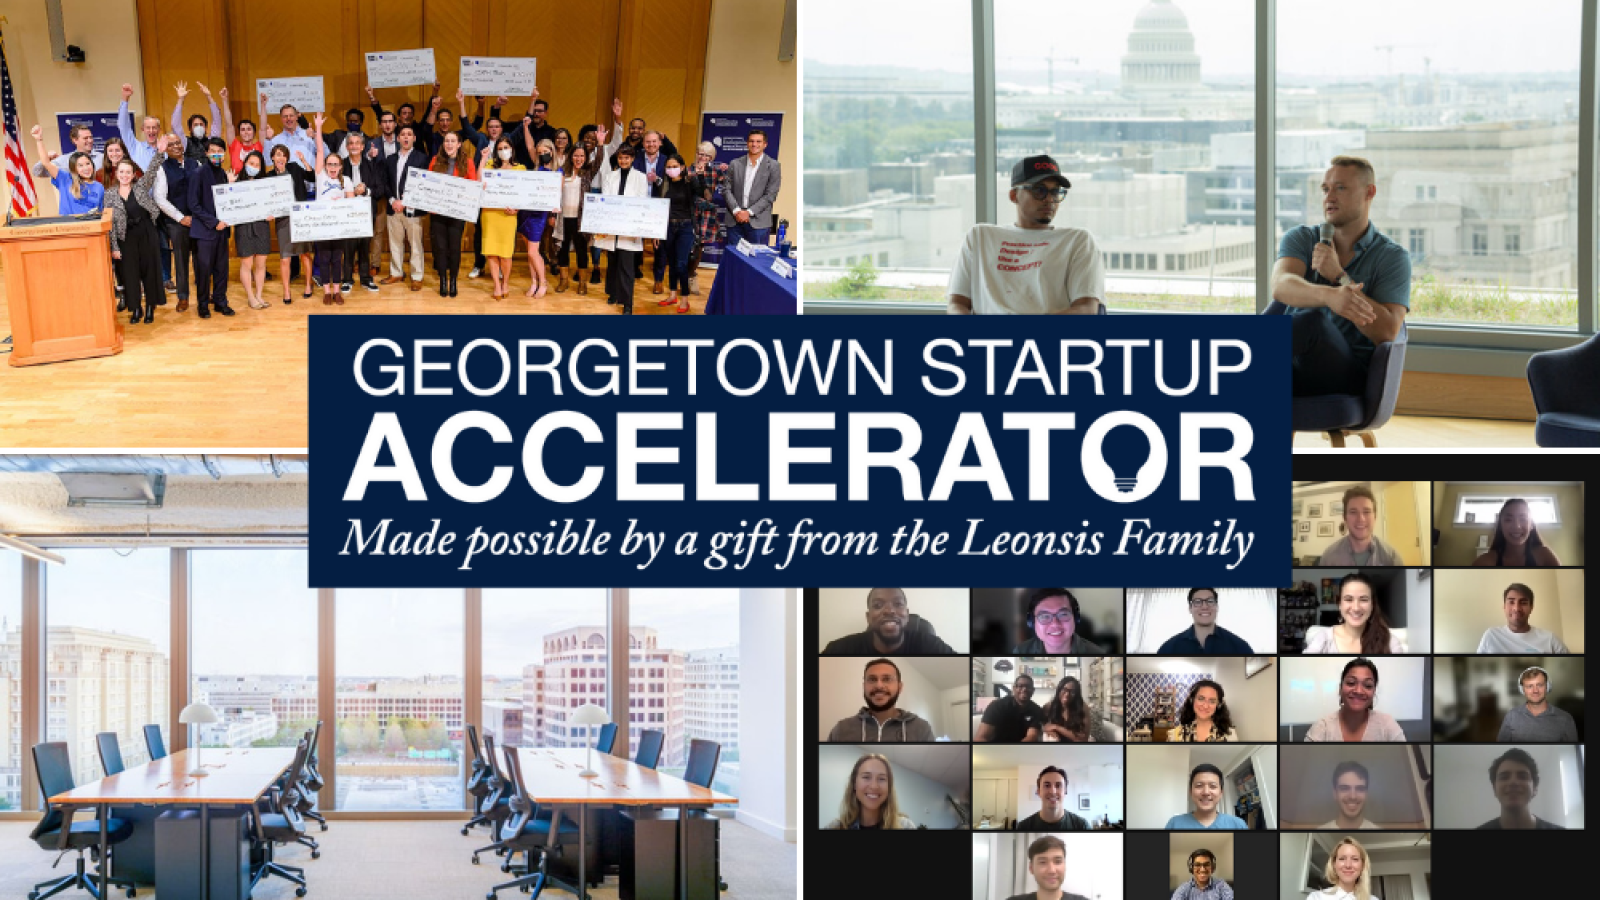 An image of the new new Georgetown Startup Accelerator program.